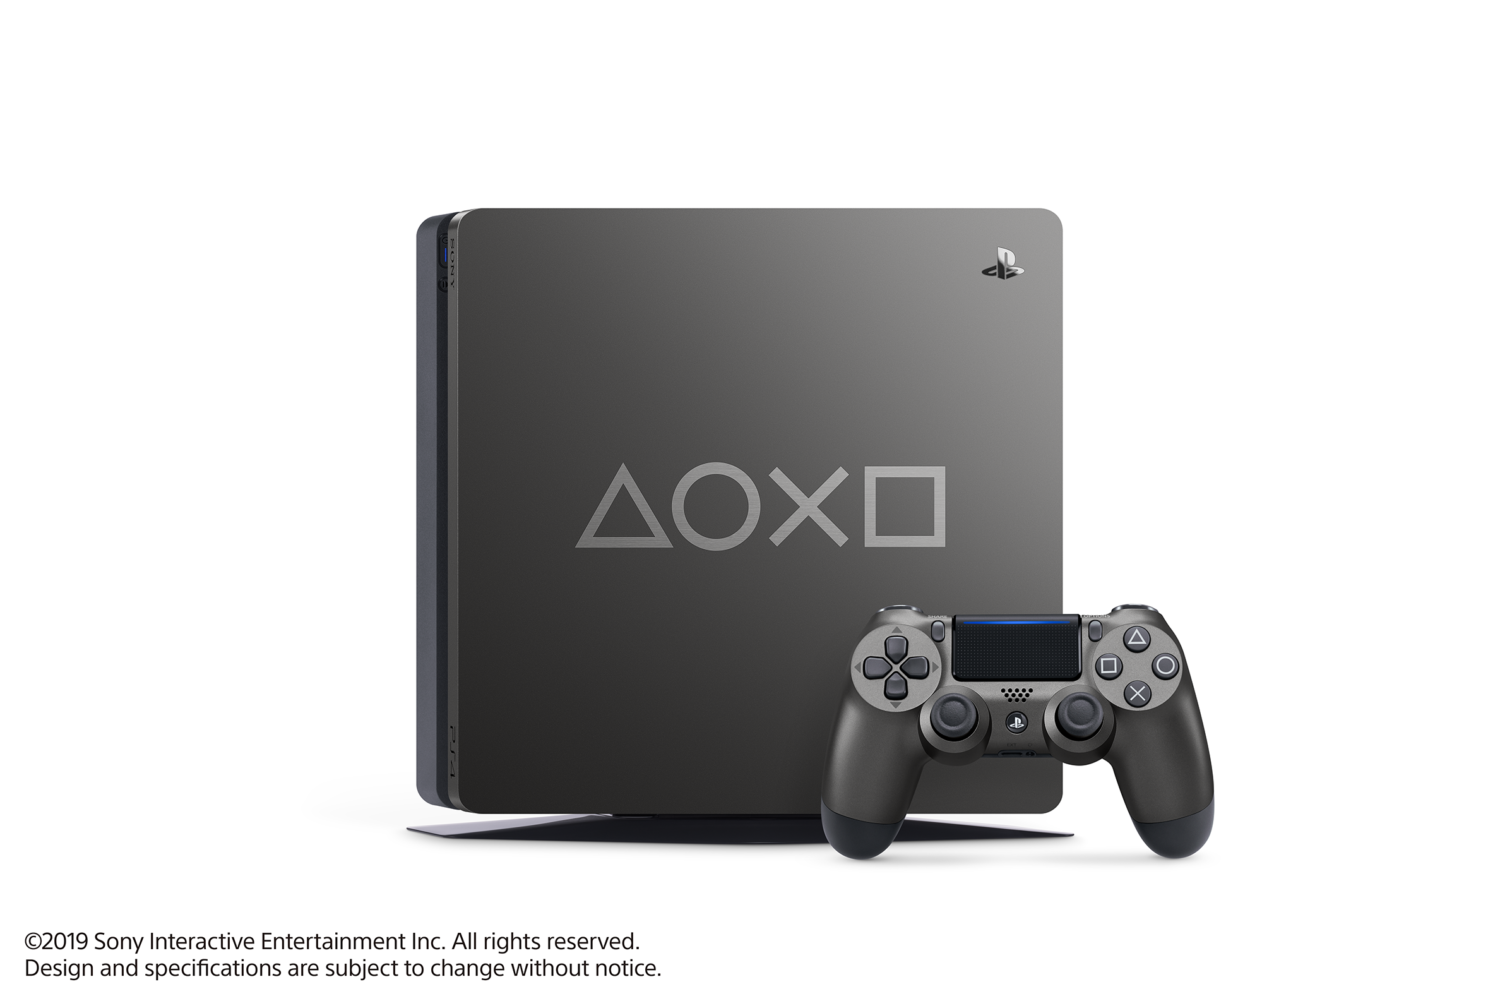 Introducing: Days of Play Limited Edition Playstation 4 -